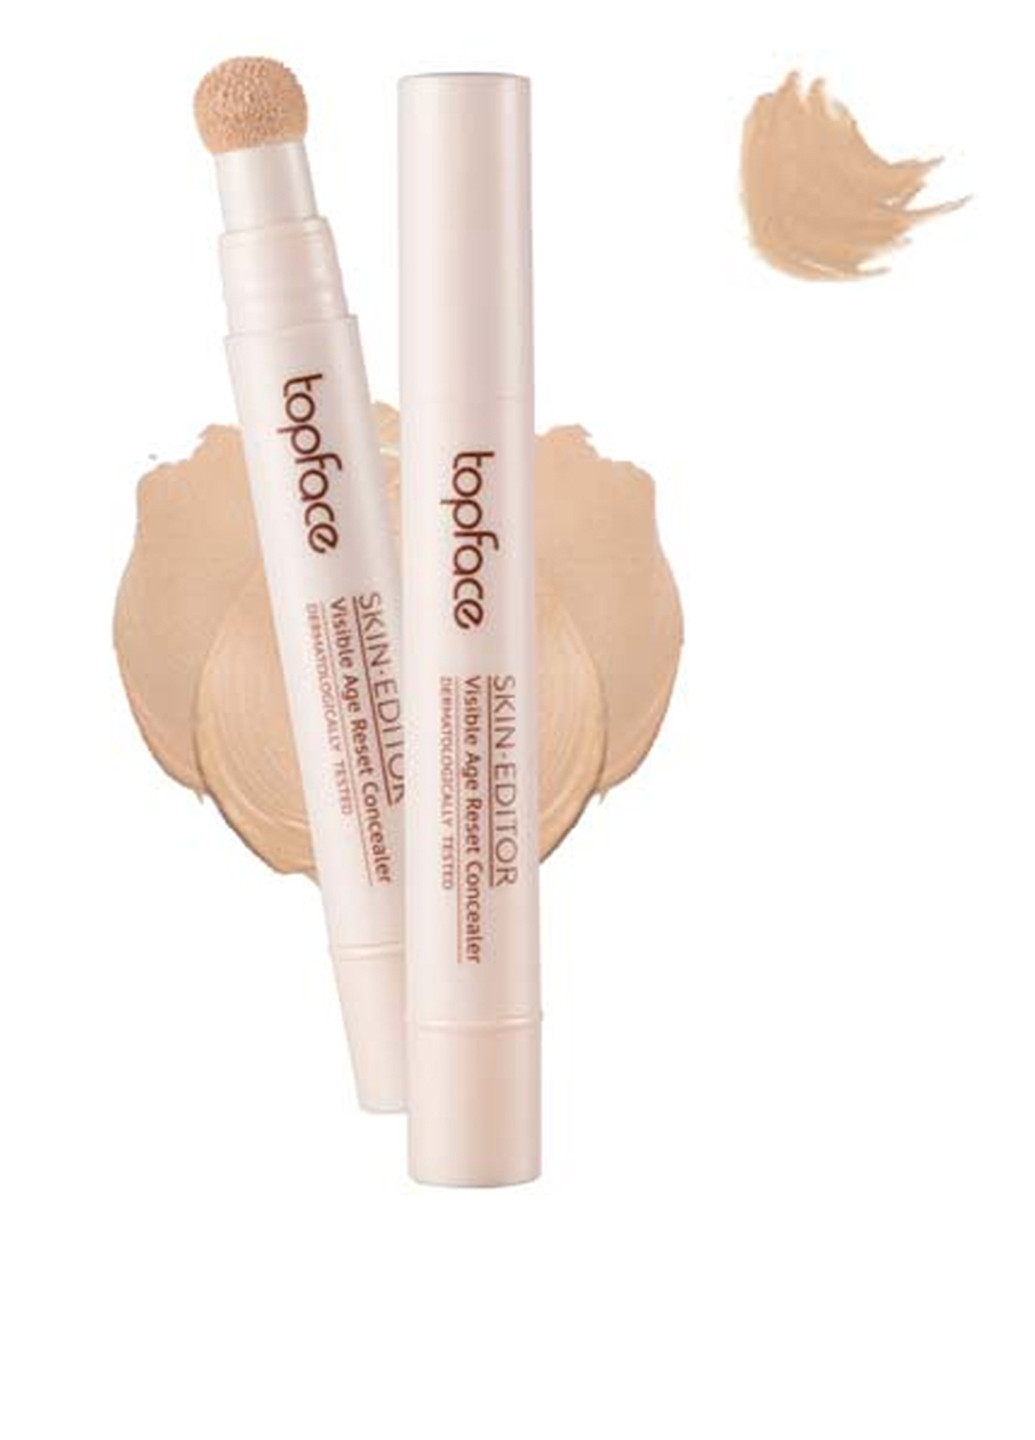 Консилер Skin Editor Concealer PT466 №005, 5,5 мл TopFace (72778154)